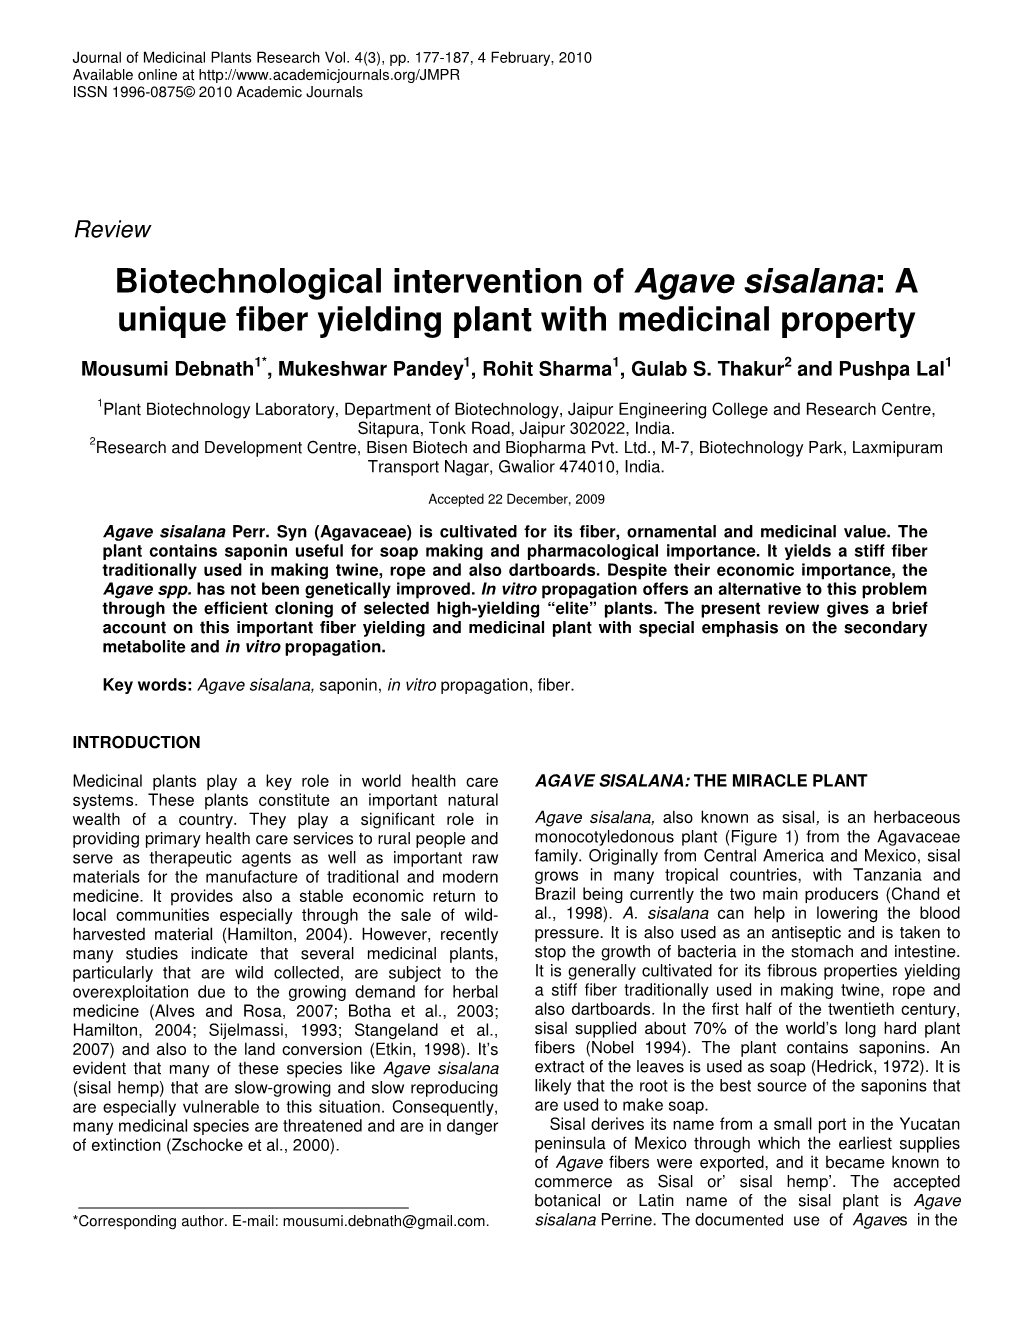 Biotechnological Intervention of Agave Sisalana: a Unique Fiber Yielding Plant with Medicinal Property